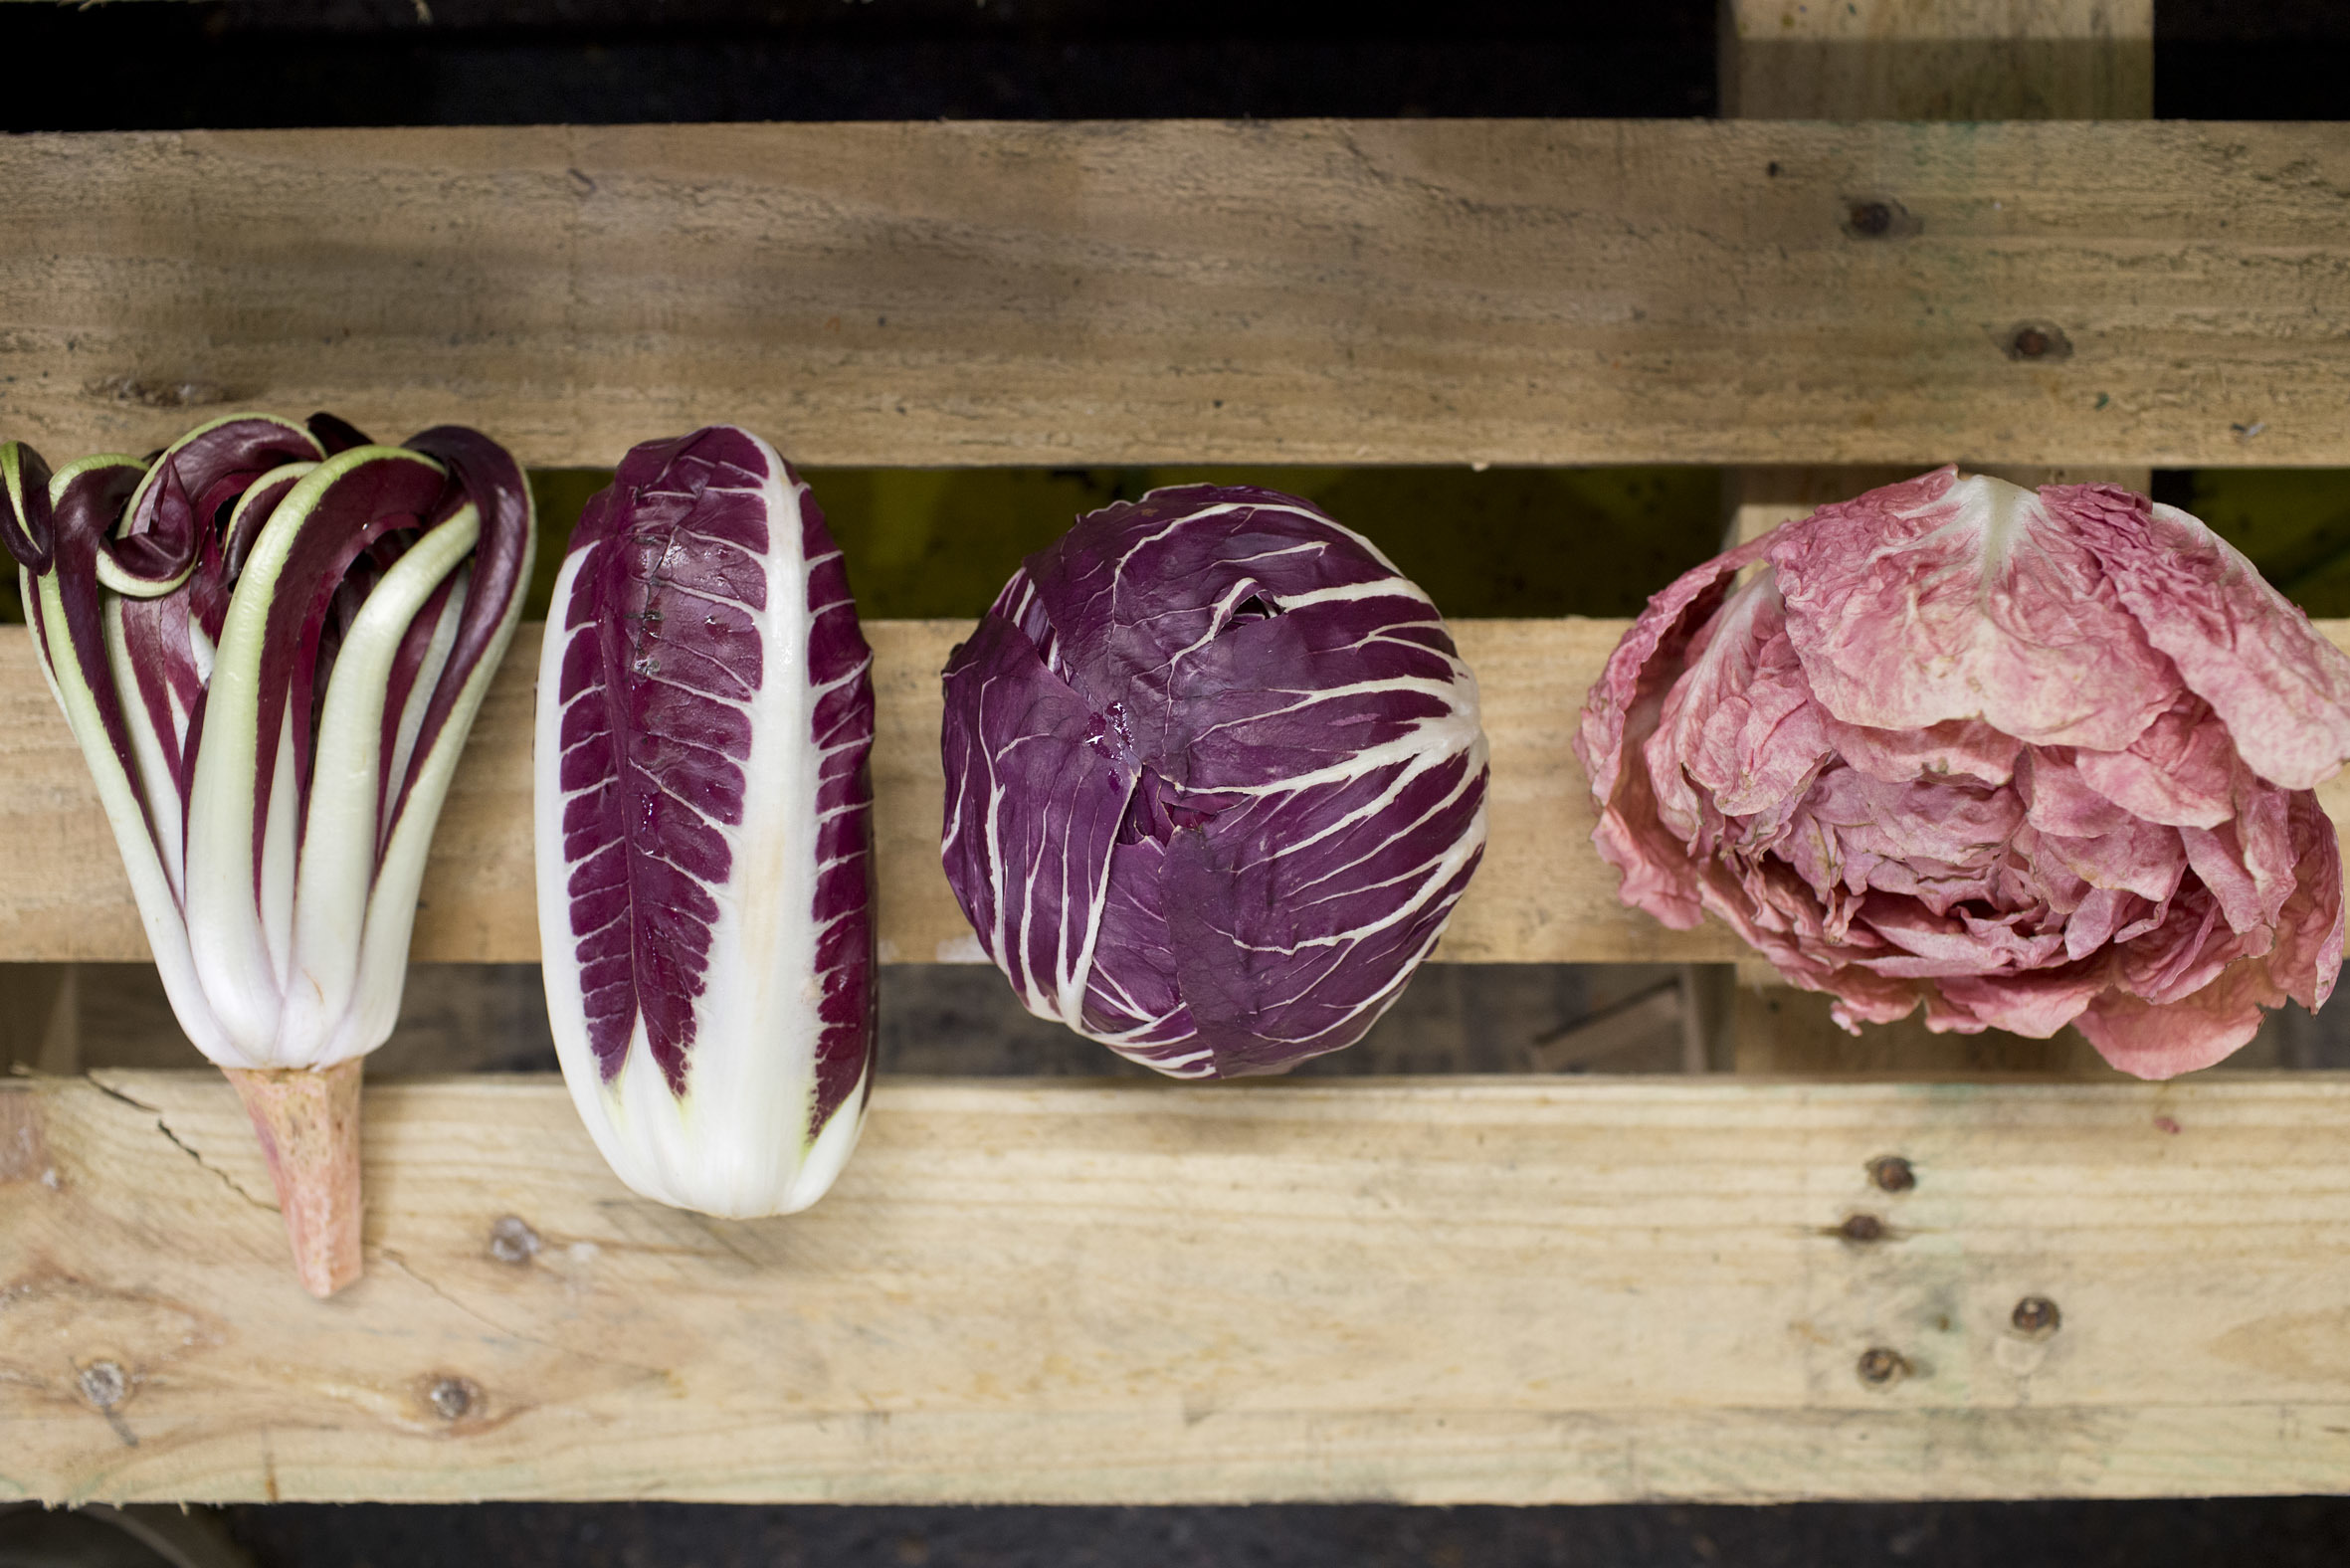 fruit-and-vegetable-market-report-march-2014-radicchio.jpg?mtime=20170922112646#asset:11332